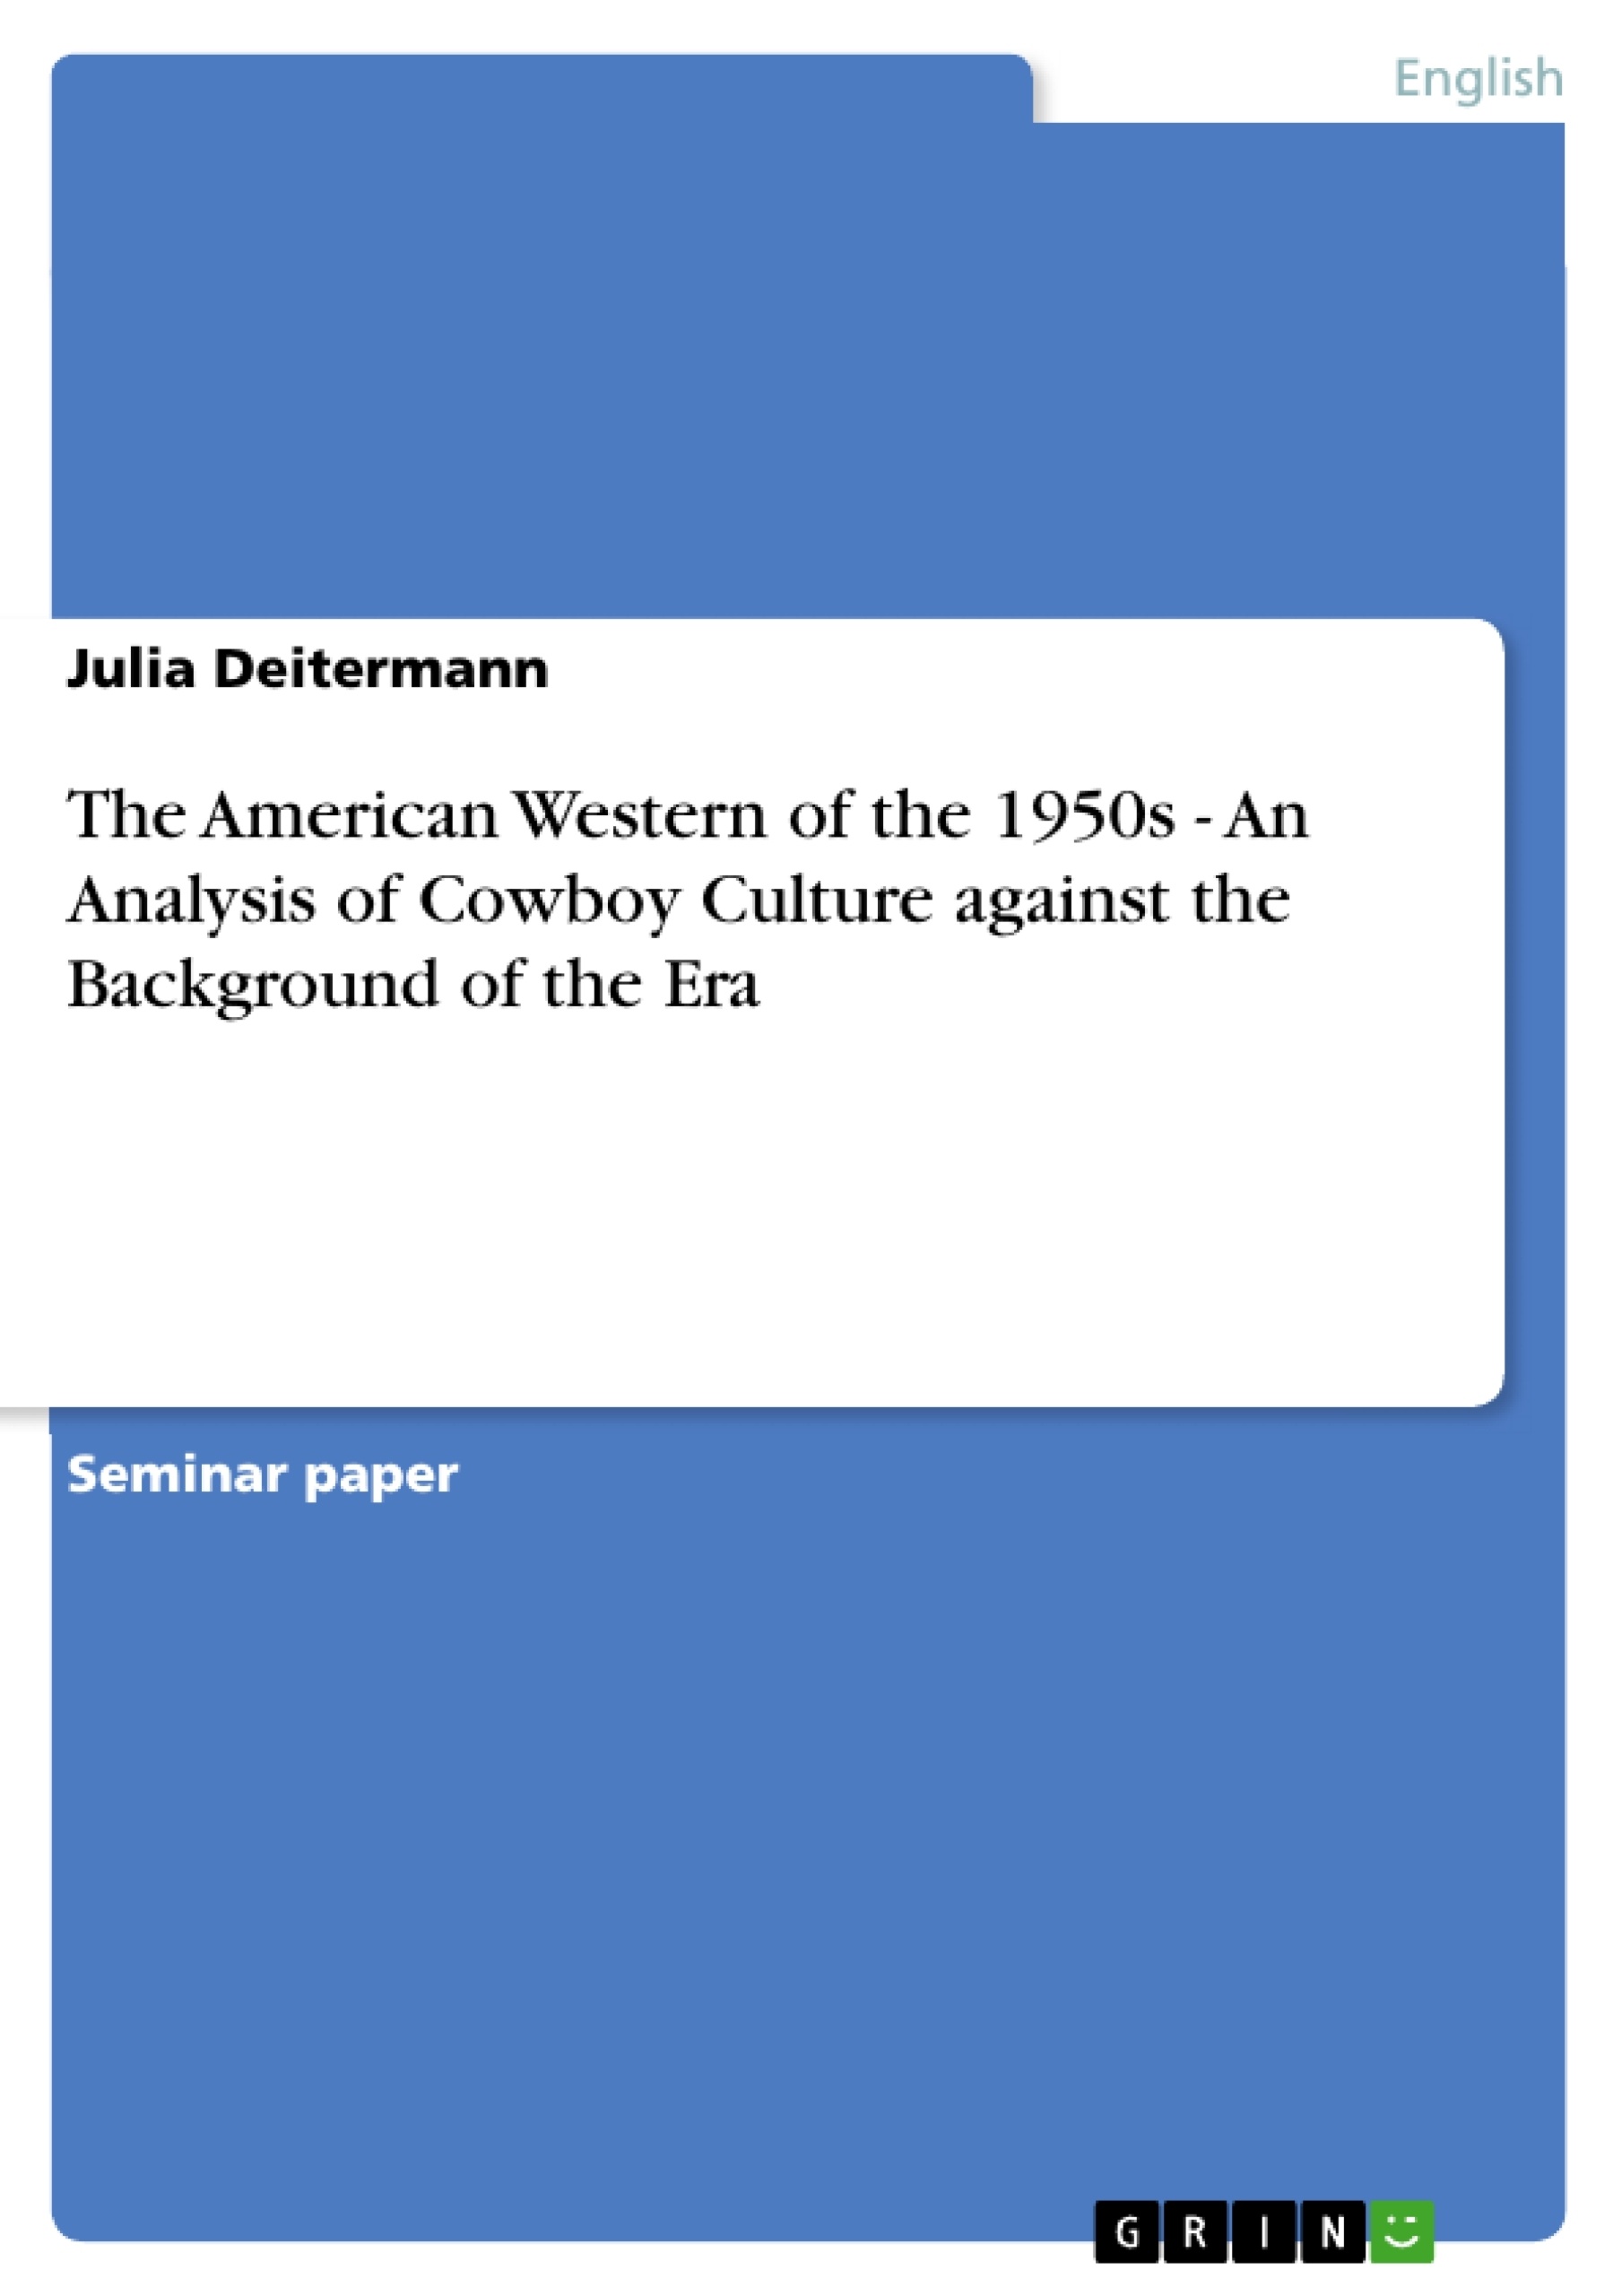 Title: The American Western of the 1950s - An Analysis of Cowboy Culture against the Background of the Era